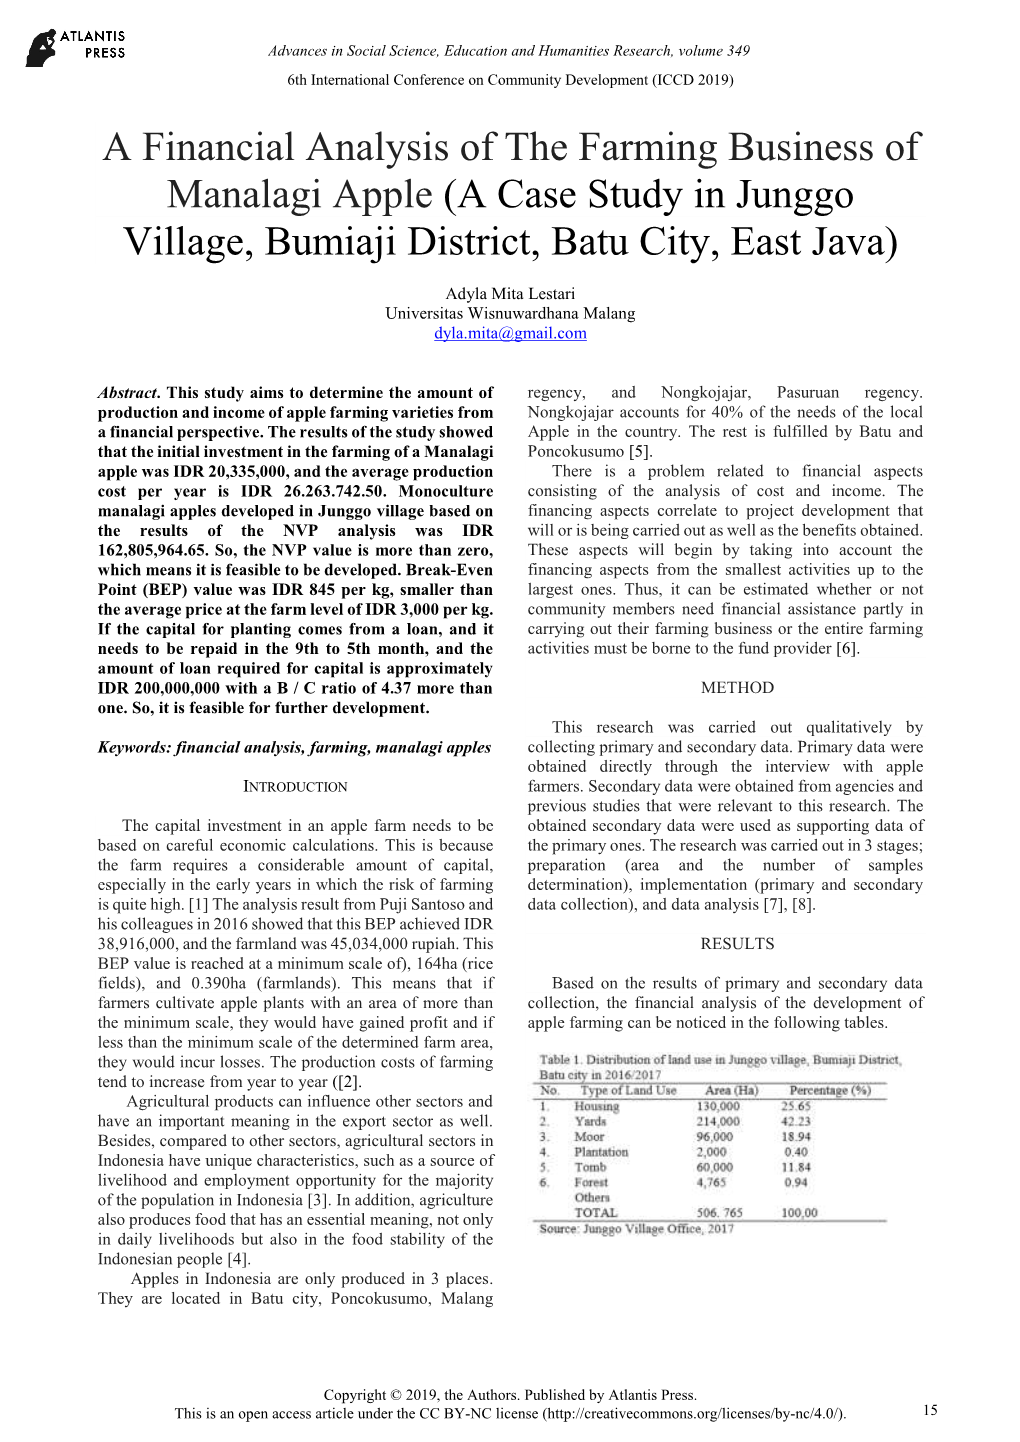 A Financial Analysis of the Farming Business of Manalagi Apple (A Case Study in Junggo Village, Bumiaji District, Batu City, East Java)